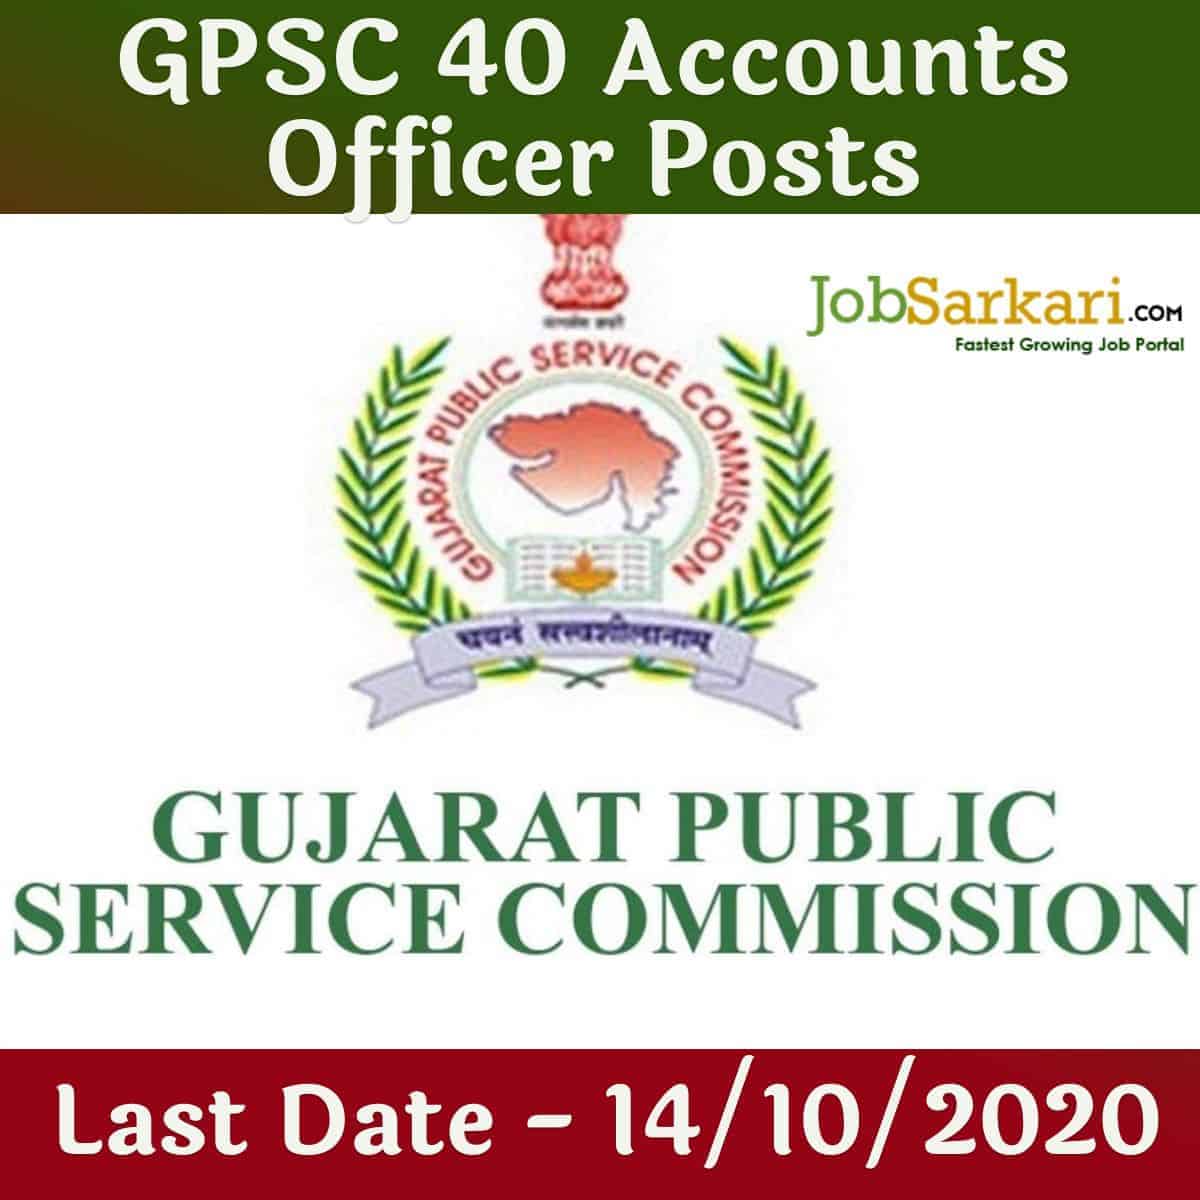 GPSC 40 Accounts Officer Posts